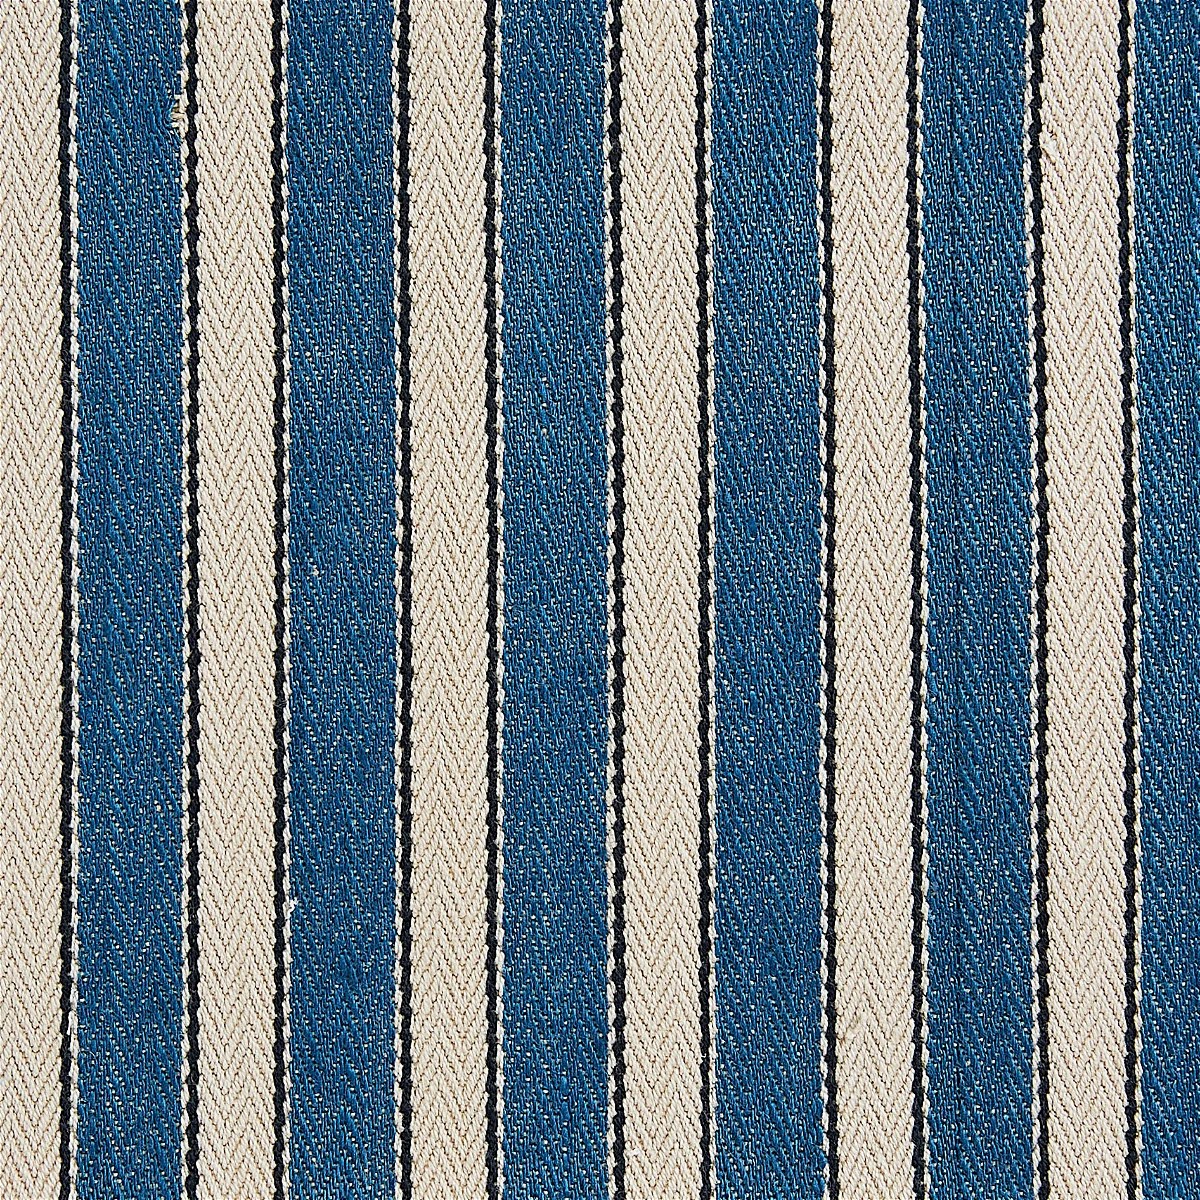 The image of an Antique Ticking Stripe Fabric product